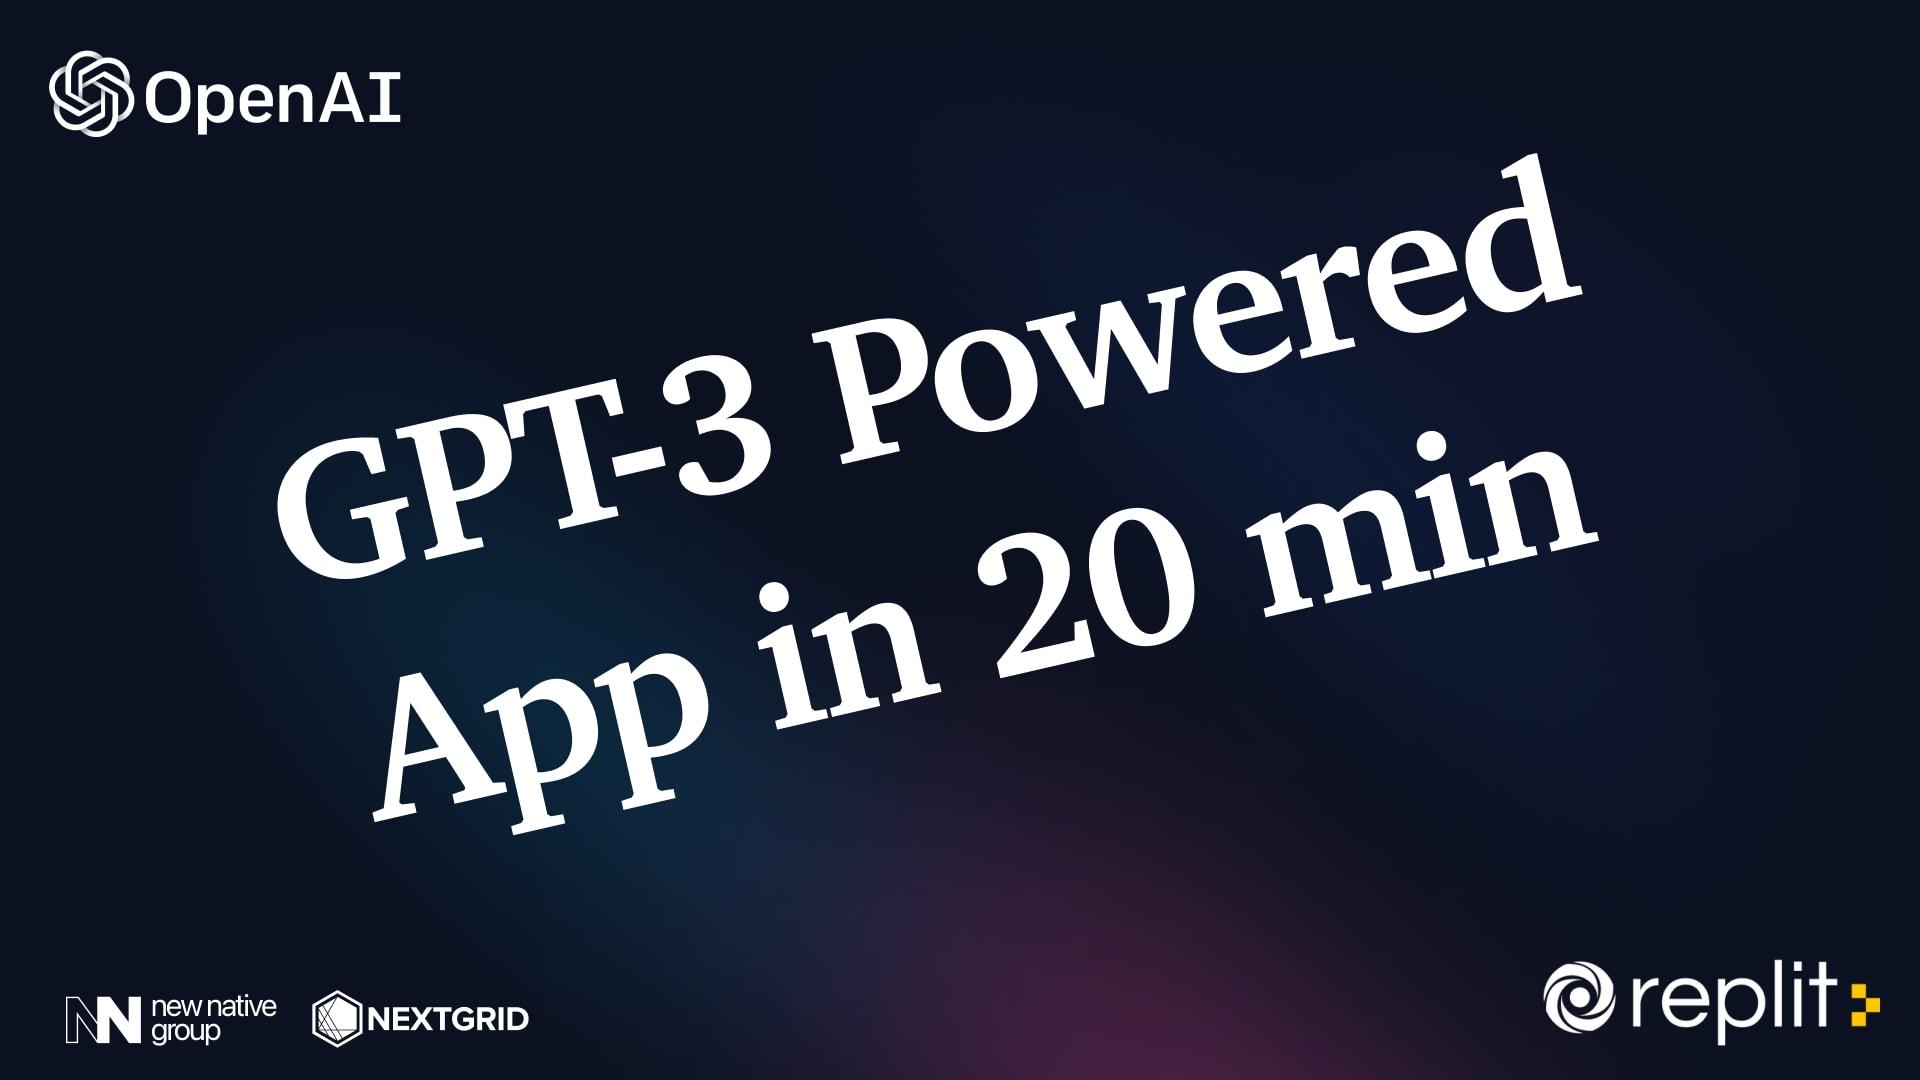 How to use GPT-3 tutorial: Build your own GPT-3 Powered application using streamlit tutorial